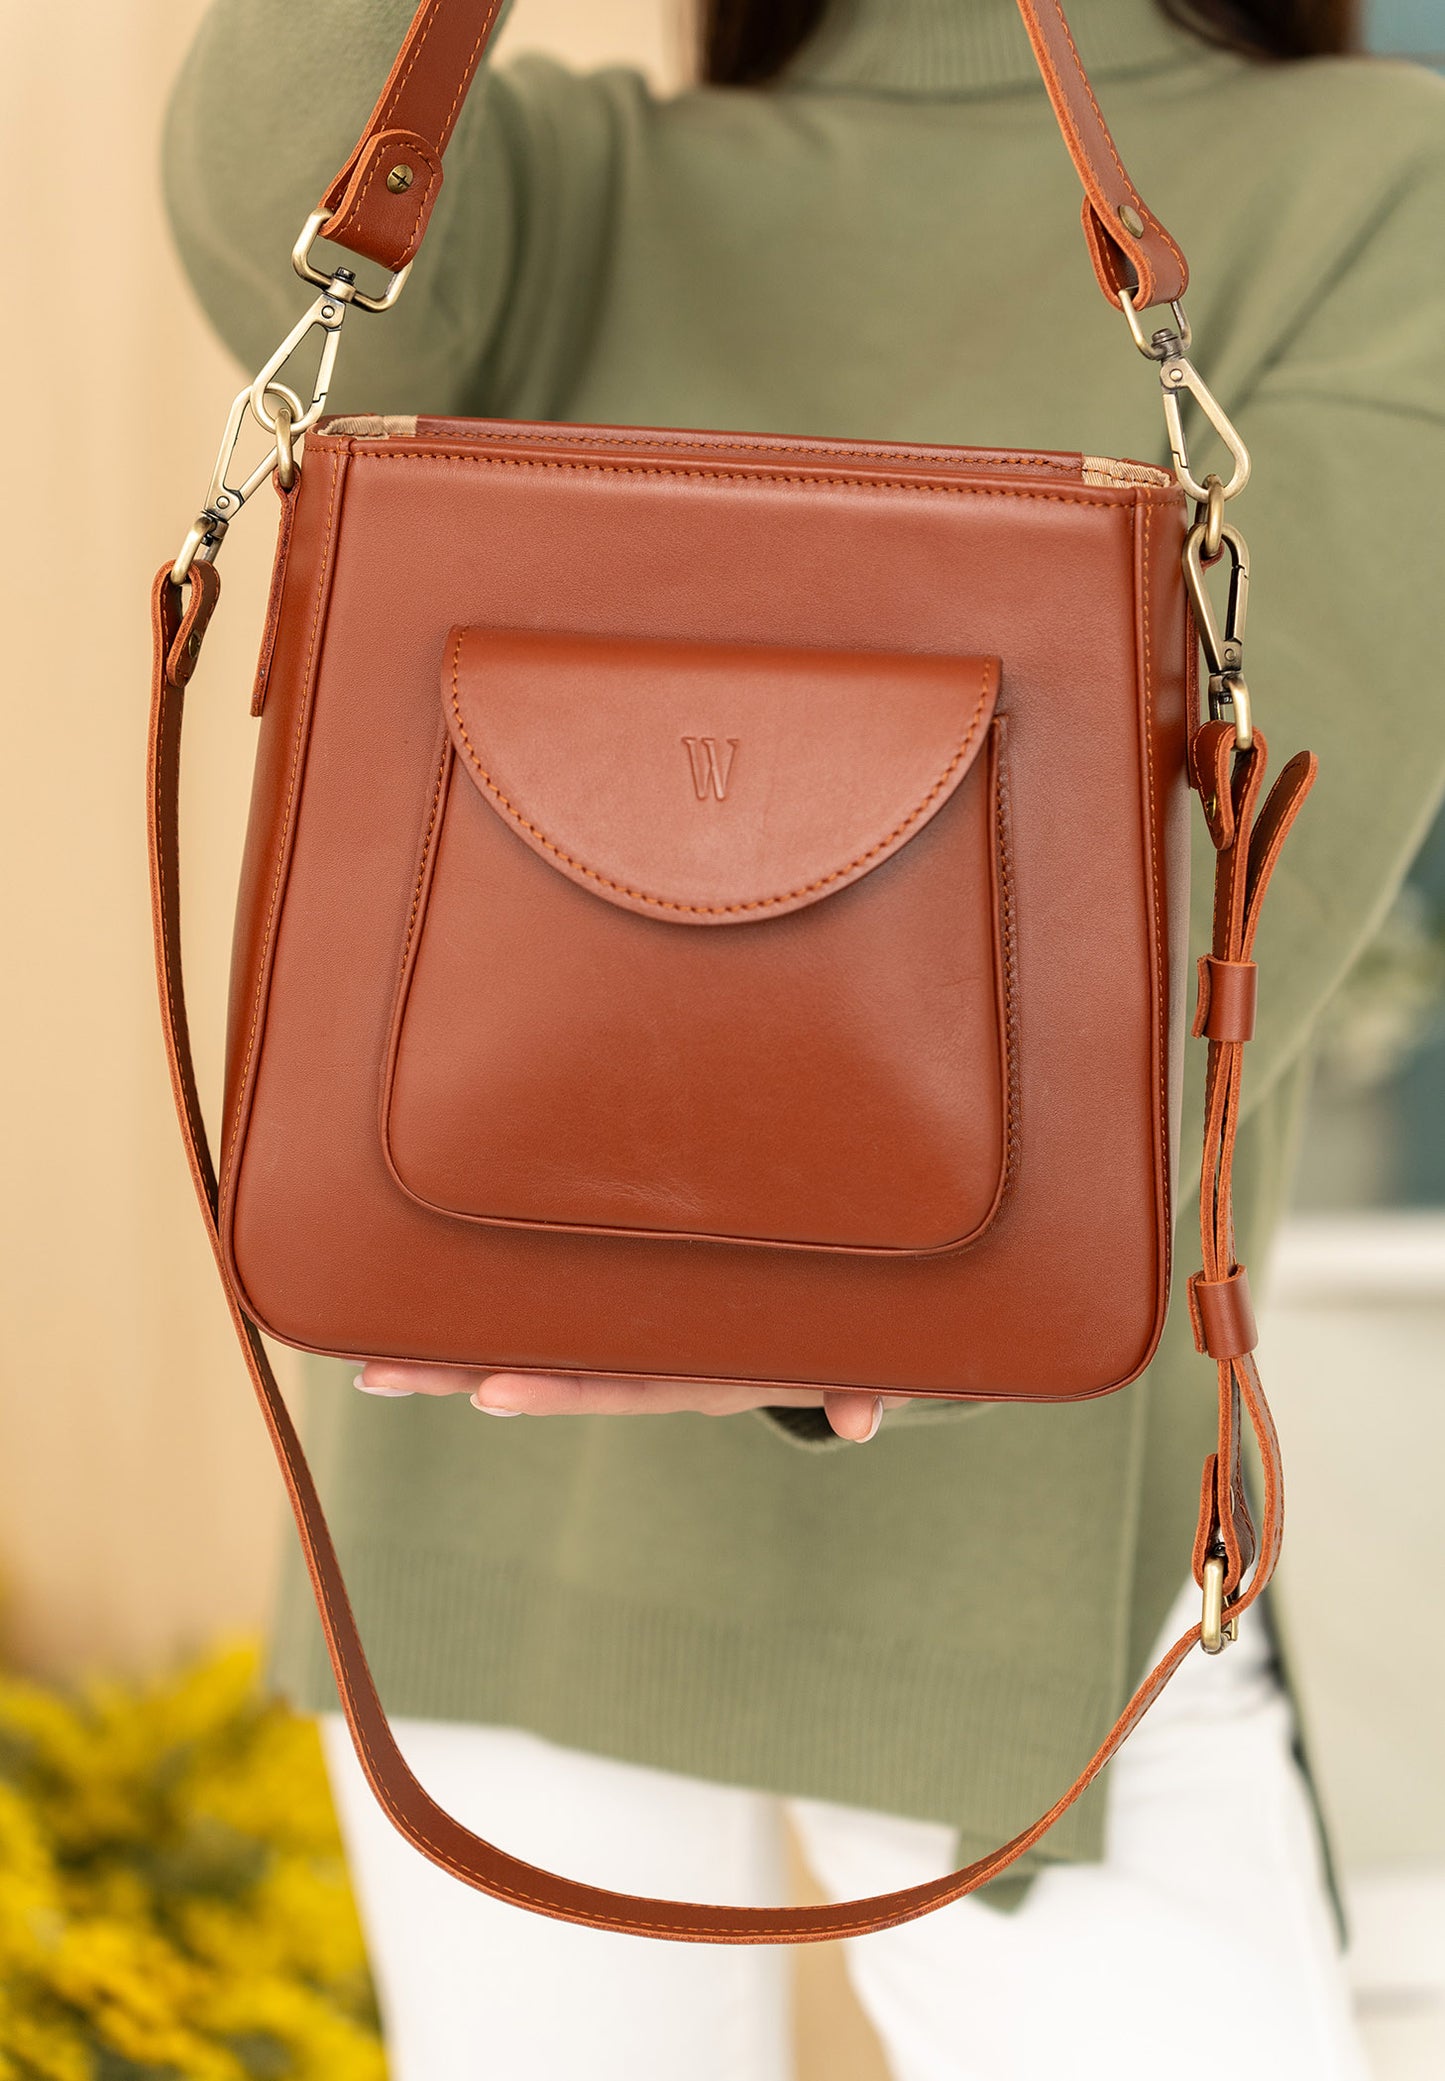 Medium leather bag for women in umber color